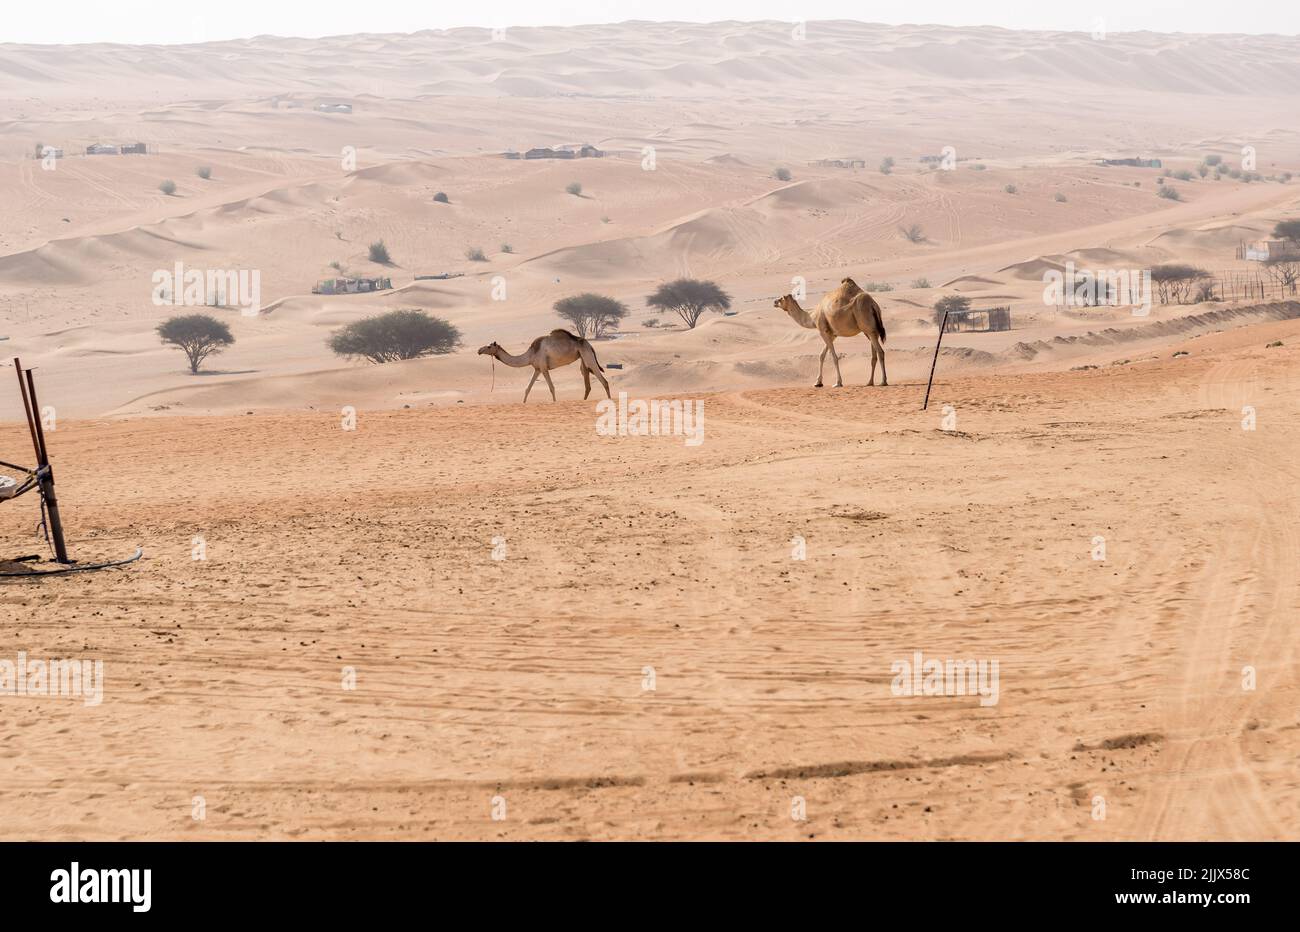 Desert landscape with Middle Eastern camels, Wahiba Sands of desert in Oman. Stock Photo